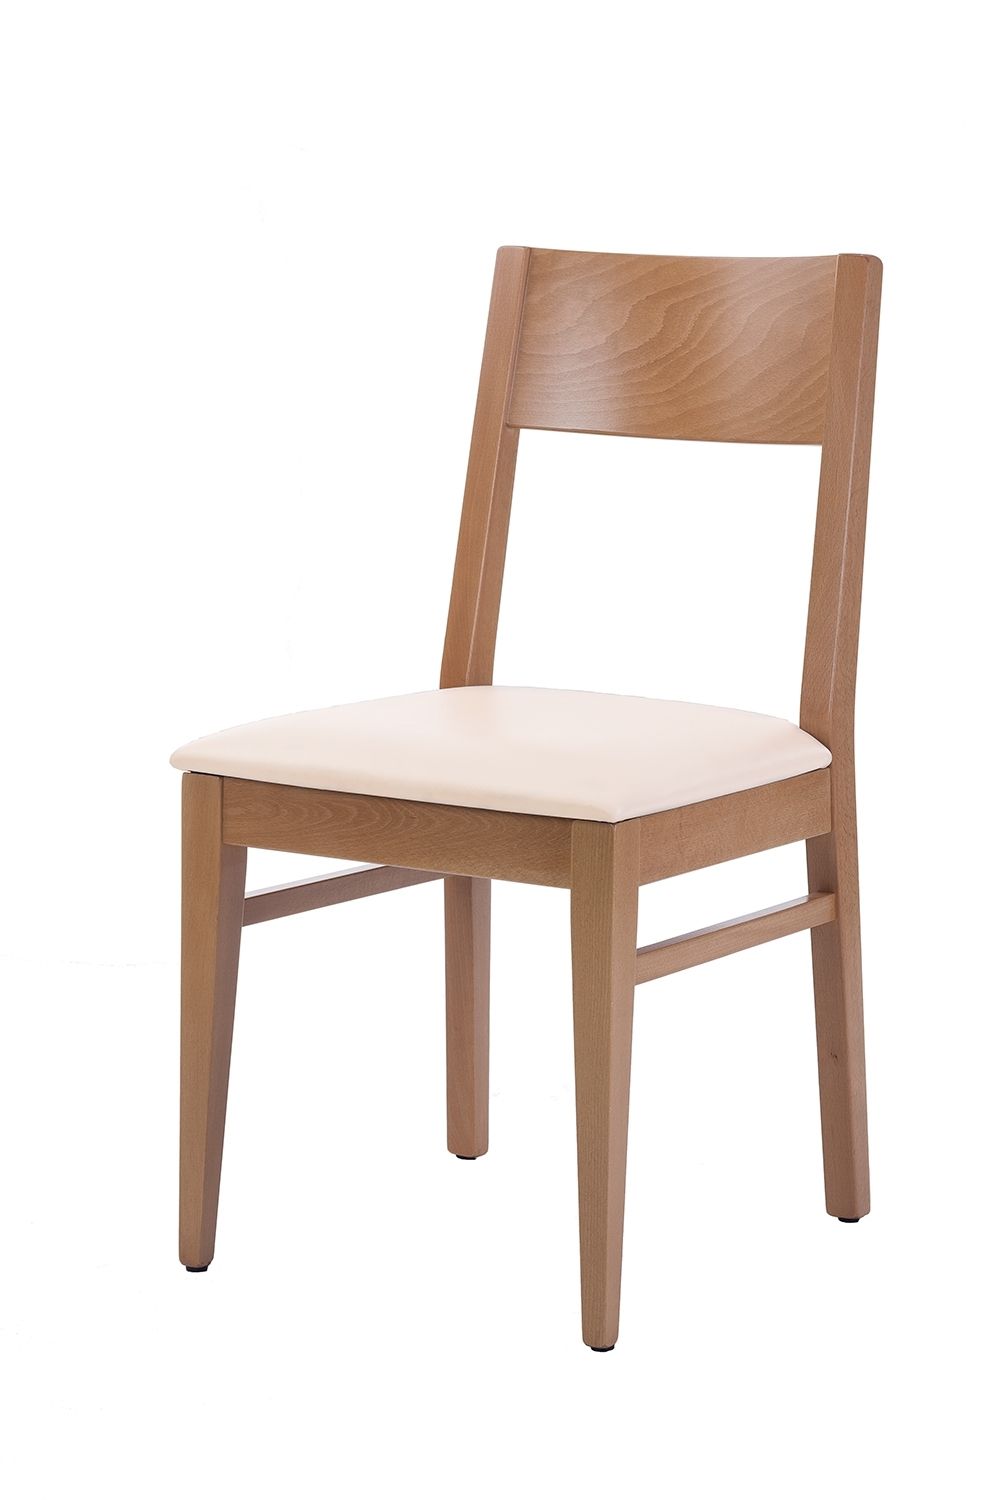 Cross Furniture – Contract Furniture Within Orion Side Chairs (View 6 of 20)